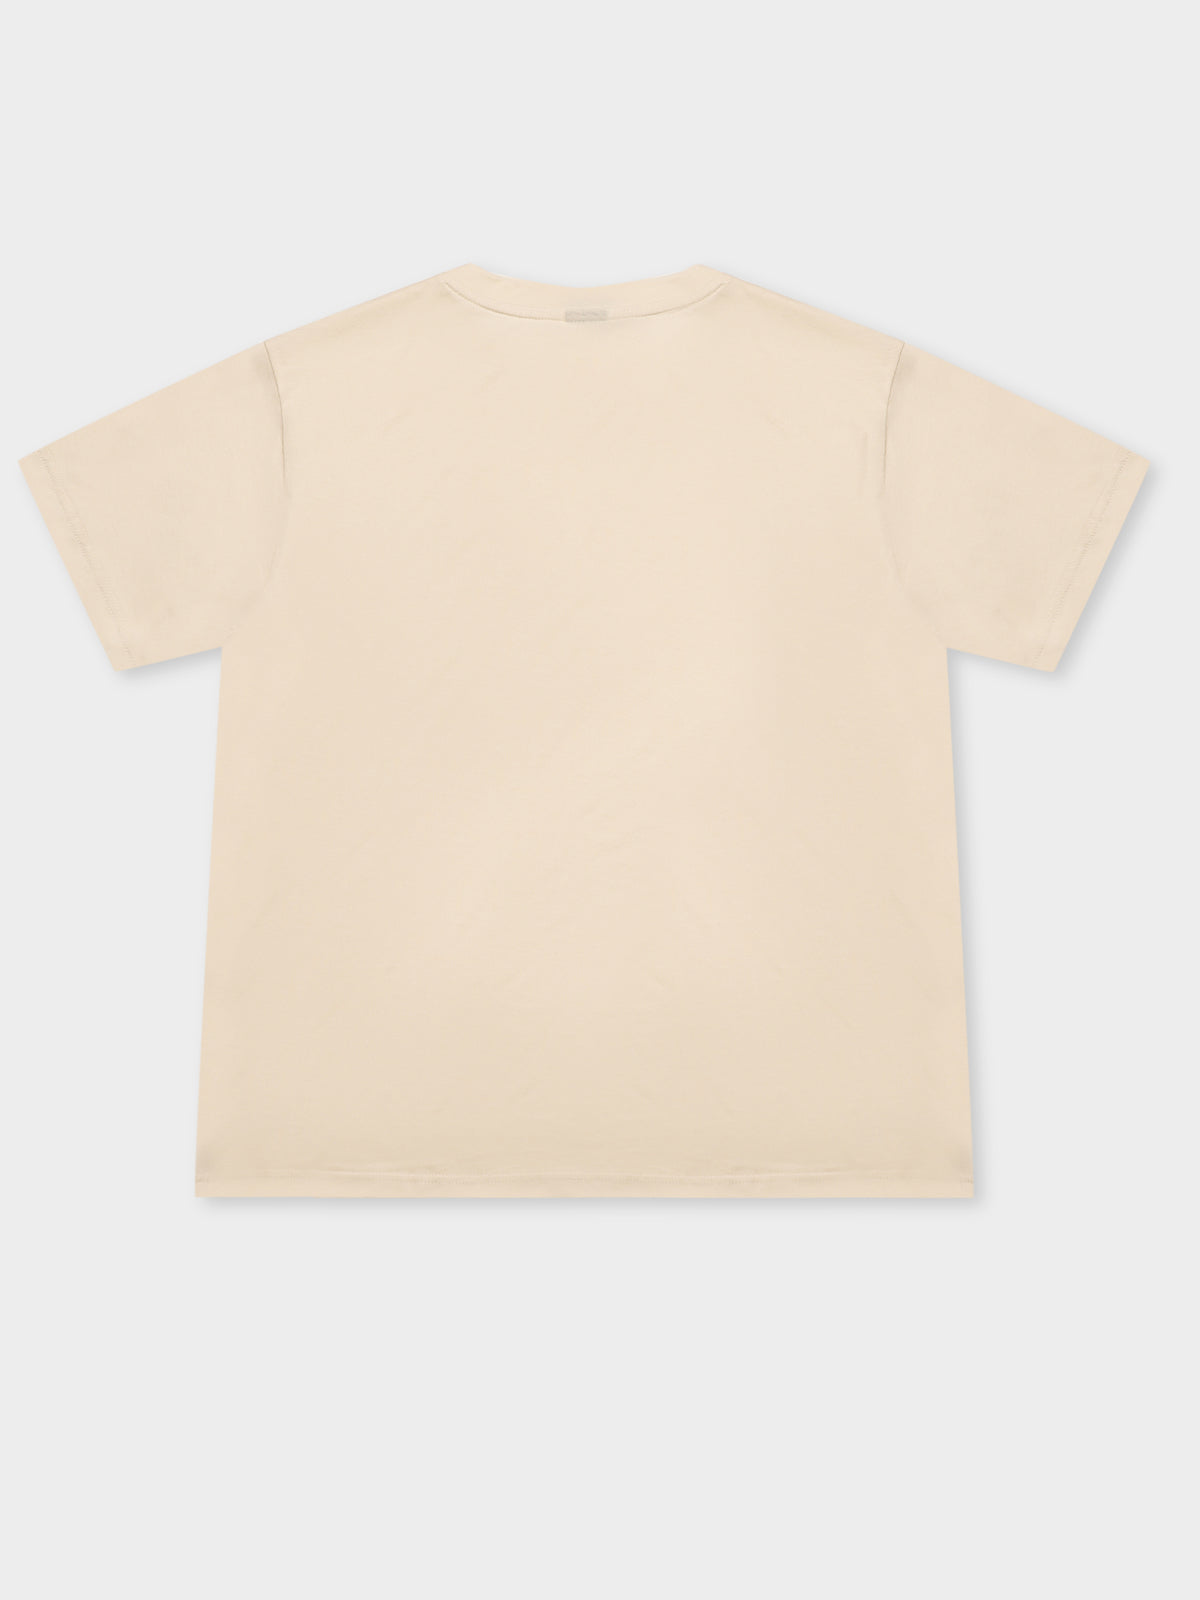 Heads Up T-Shirt in Pristine